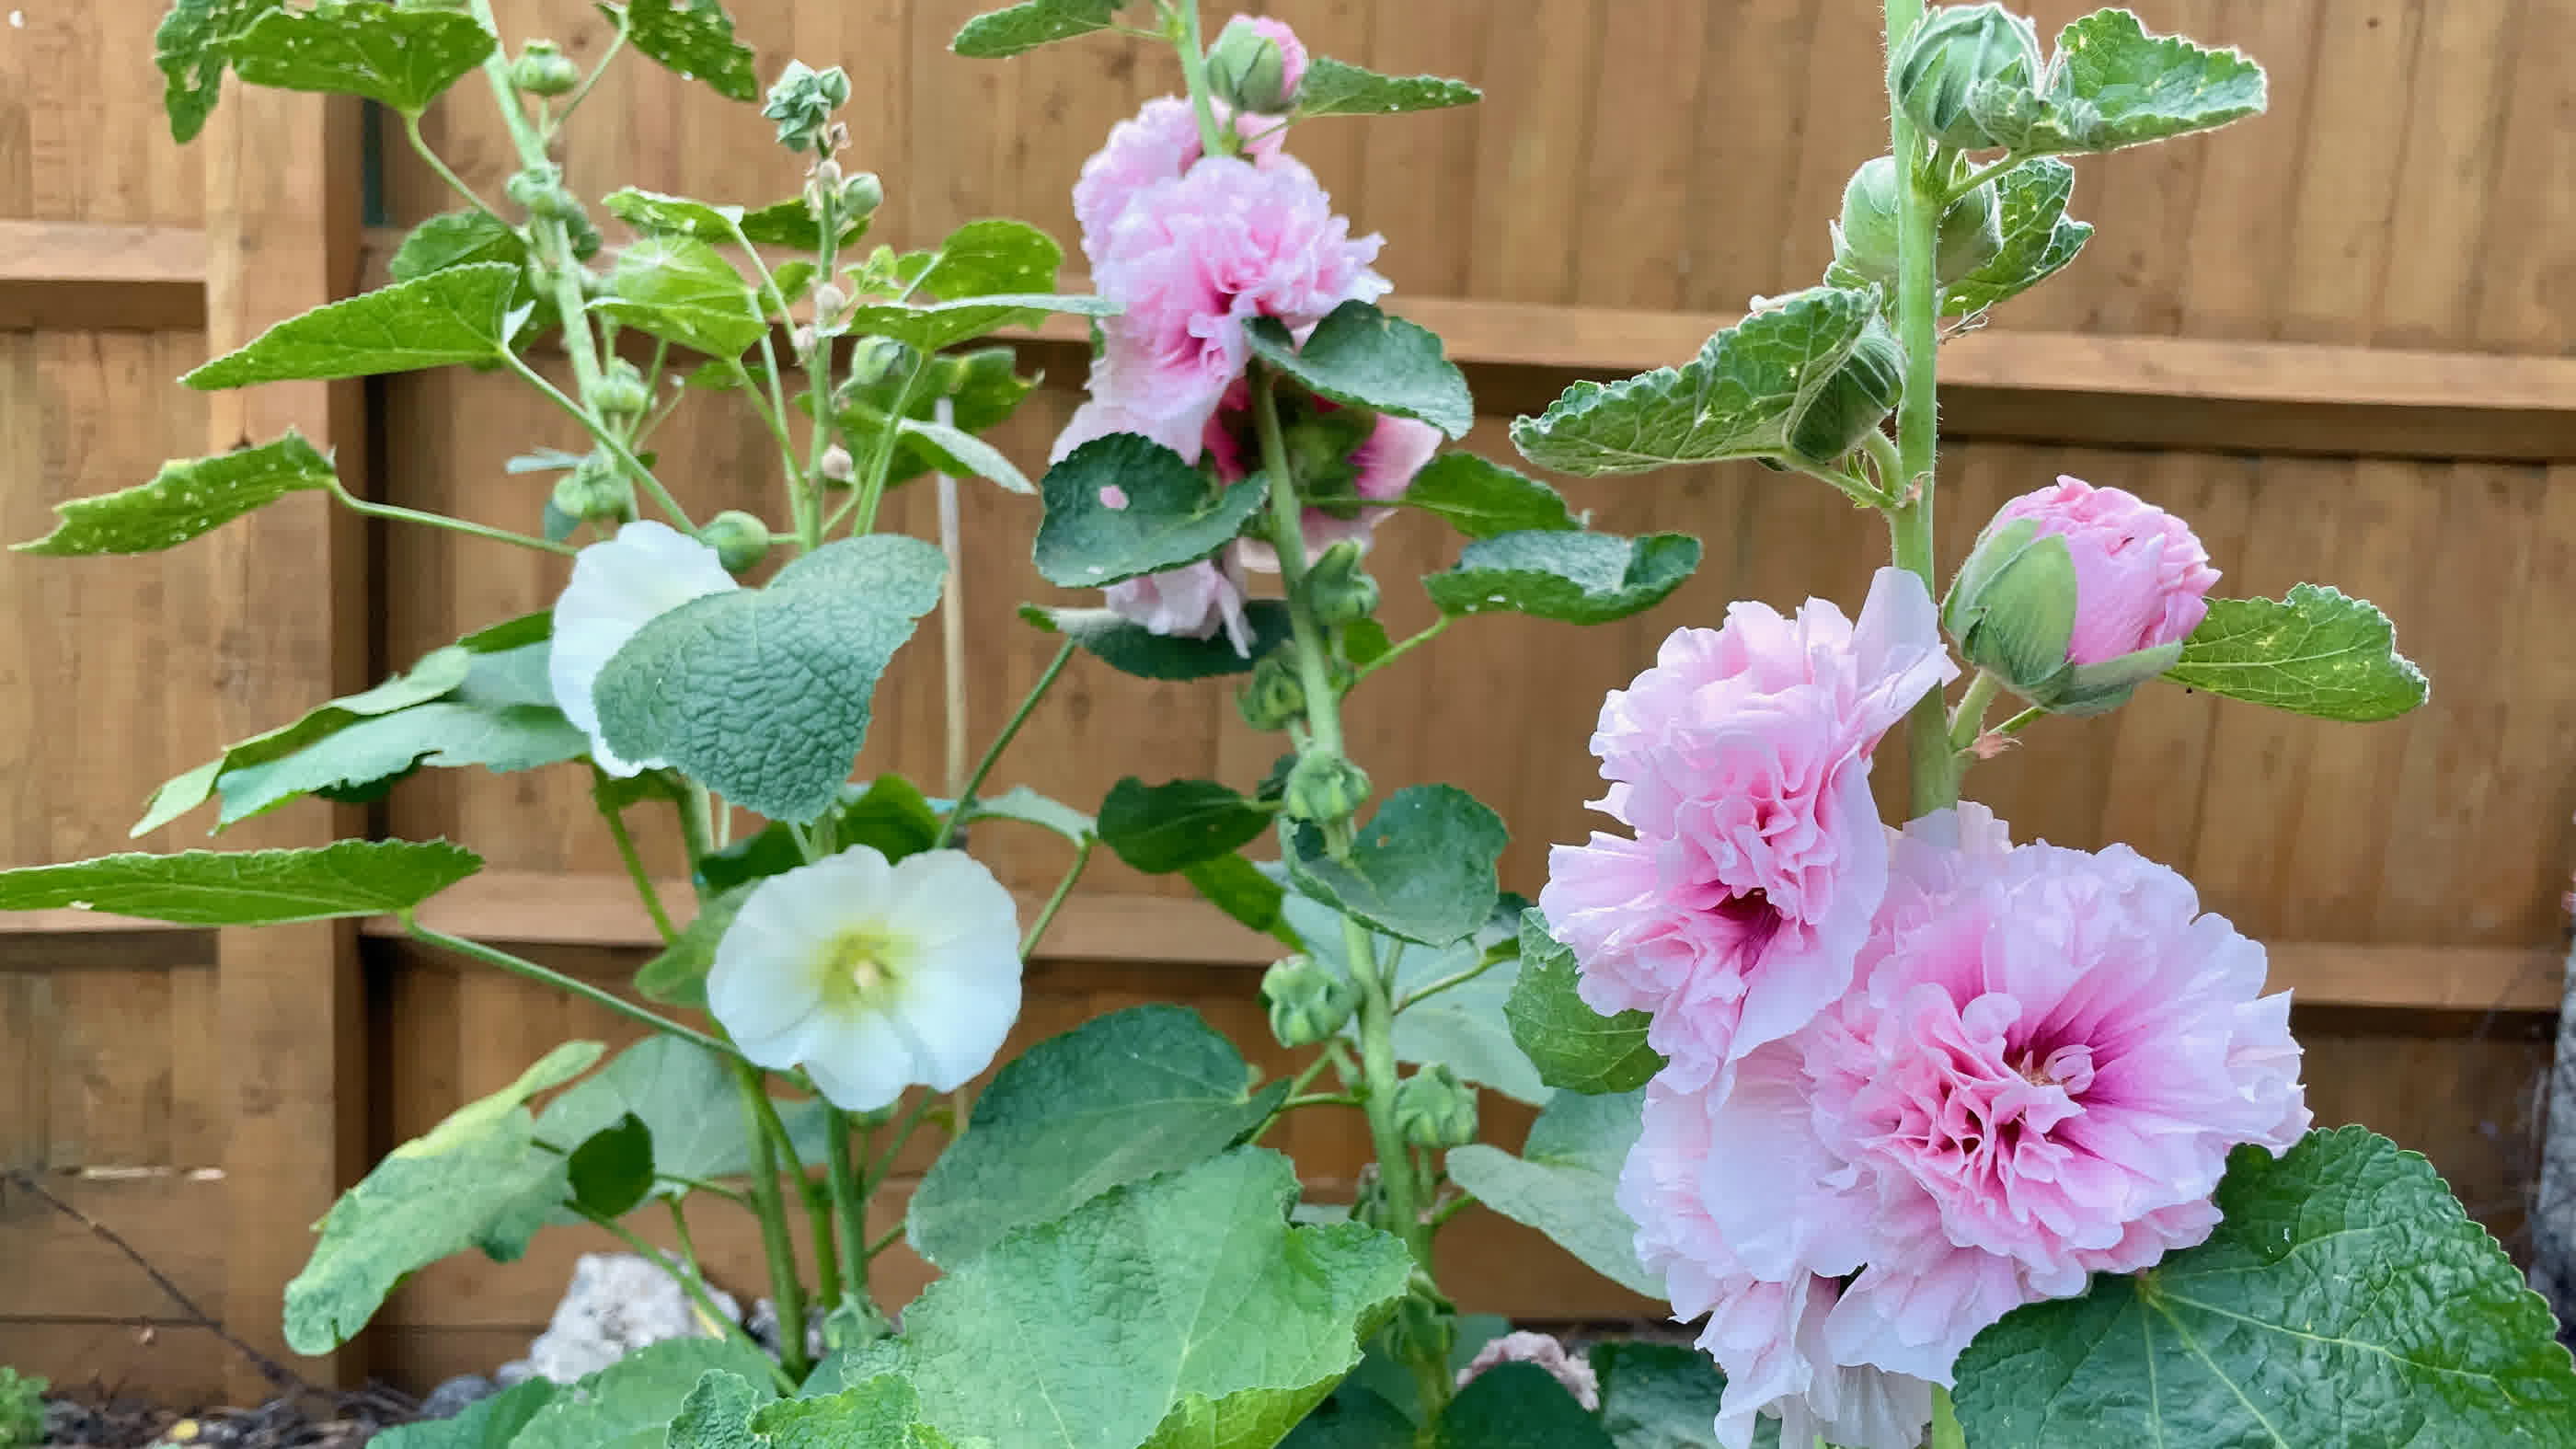 Single flowered white hollyhocks and double flowered pink hollyhocks